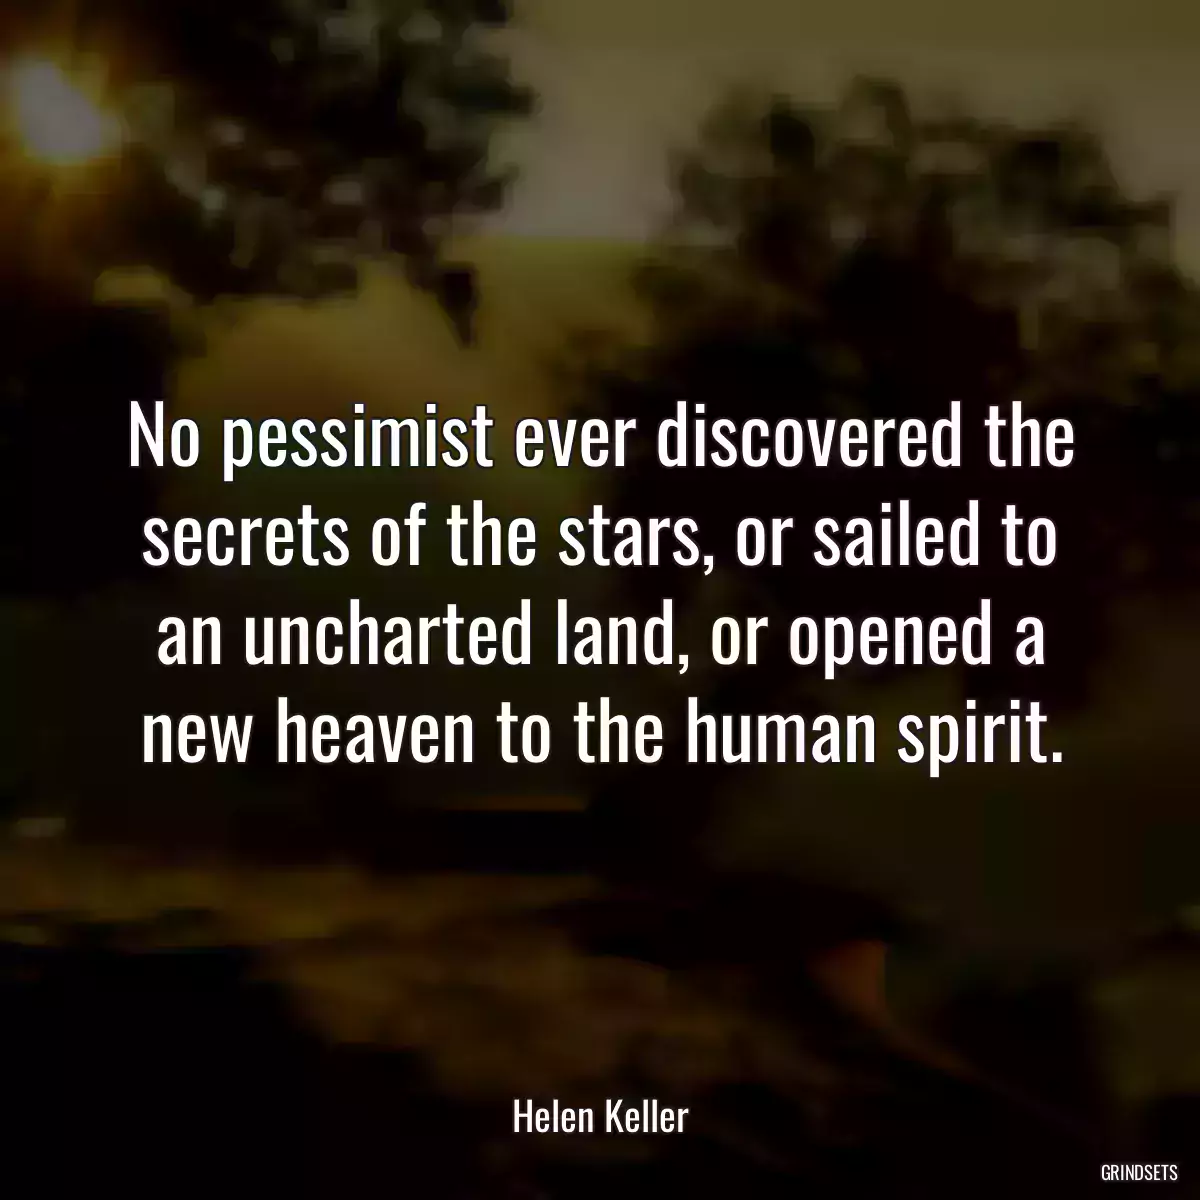 No pessimist ever discovered the secrets of the stars, or sailed to an uncharted land, or opened a new heaven to the human spirit.